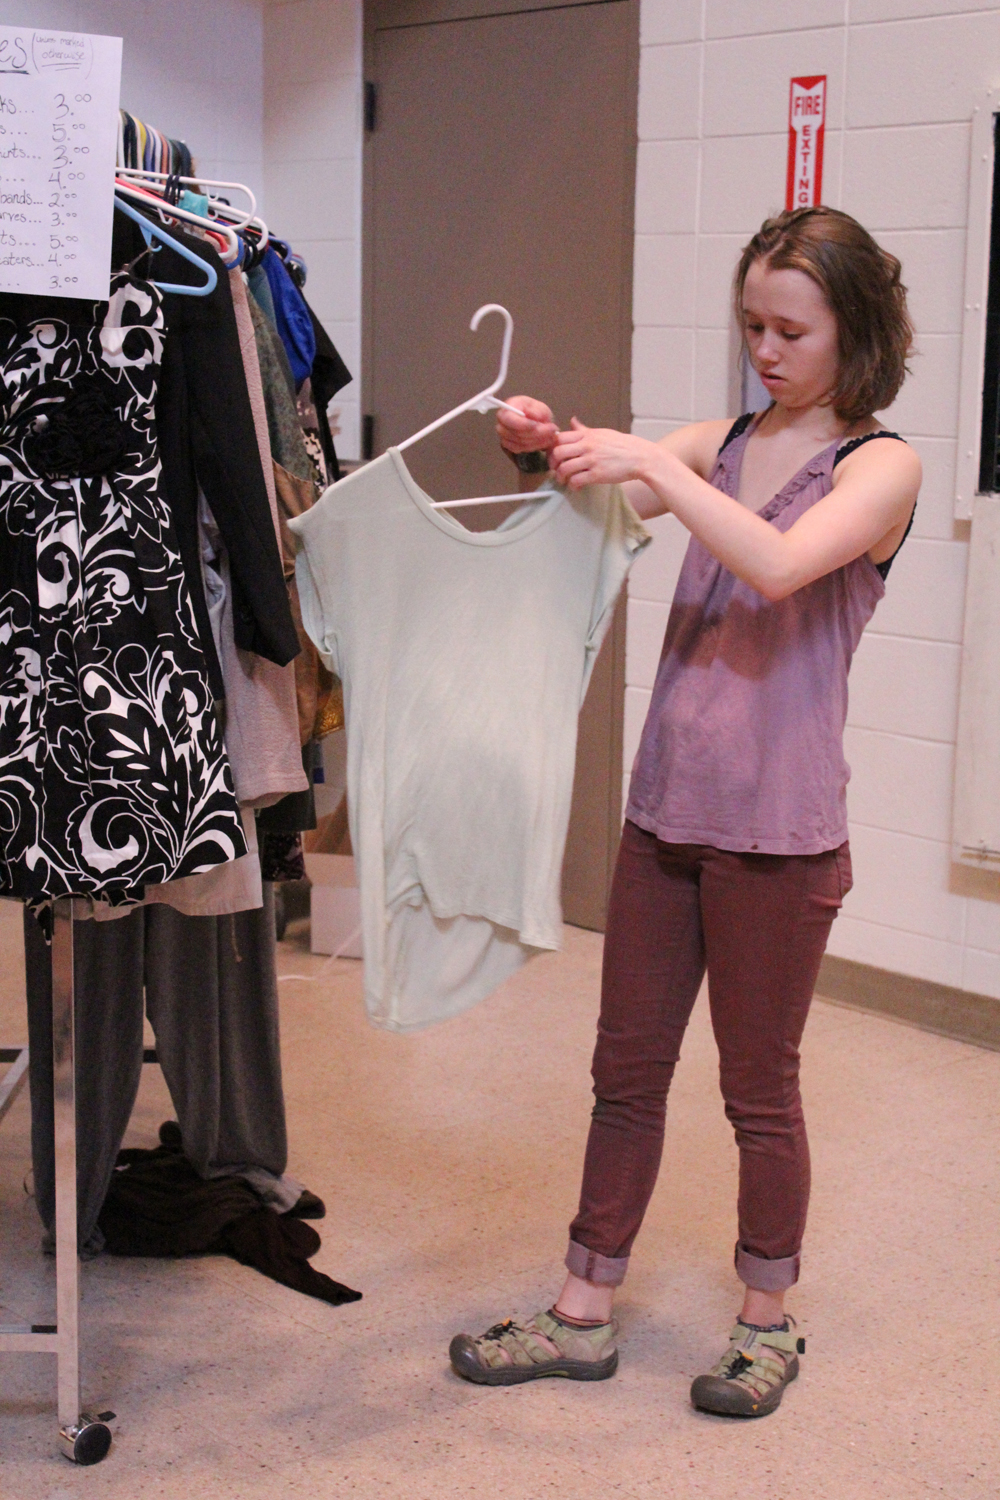 Shenandoah Lush inspects a shirt for sale at Colors of Homer. The Saturday, April 16 event sold donated clothing to raise money for the Homer High School art program in addition to the variety show featuring teens showing off their talents.-Photo by Anna Frost; Homer News